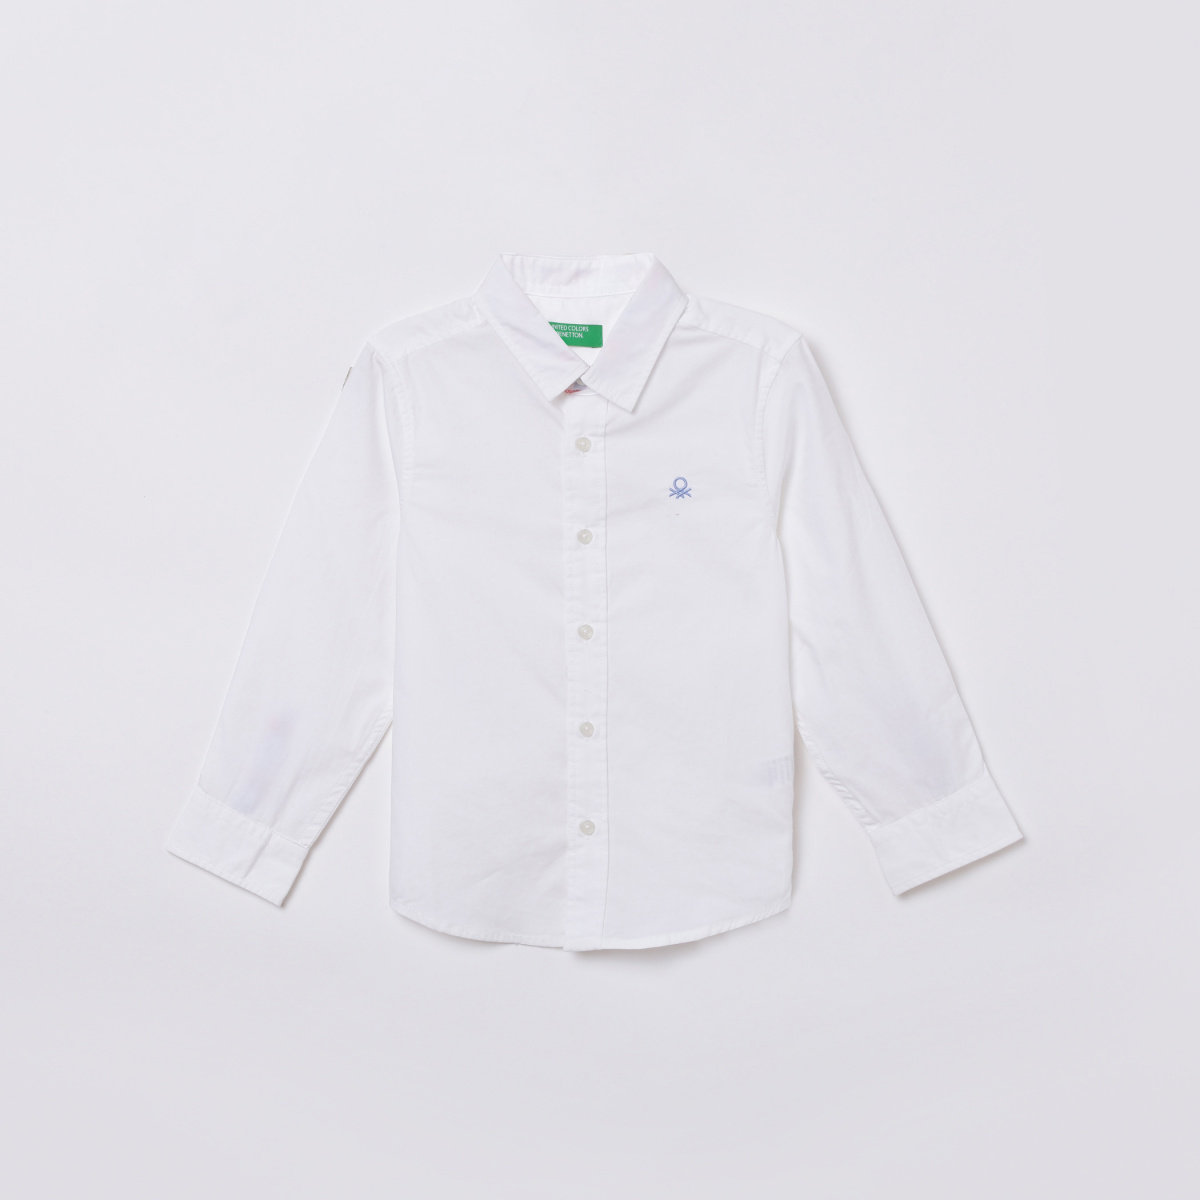 UNITED COLORS OF BENETTON Boys Solid Regular Fit Casual Shirt